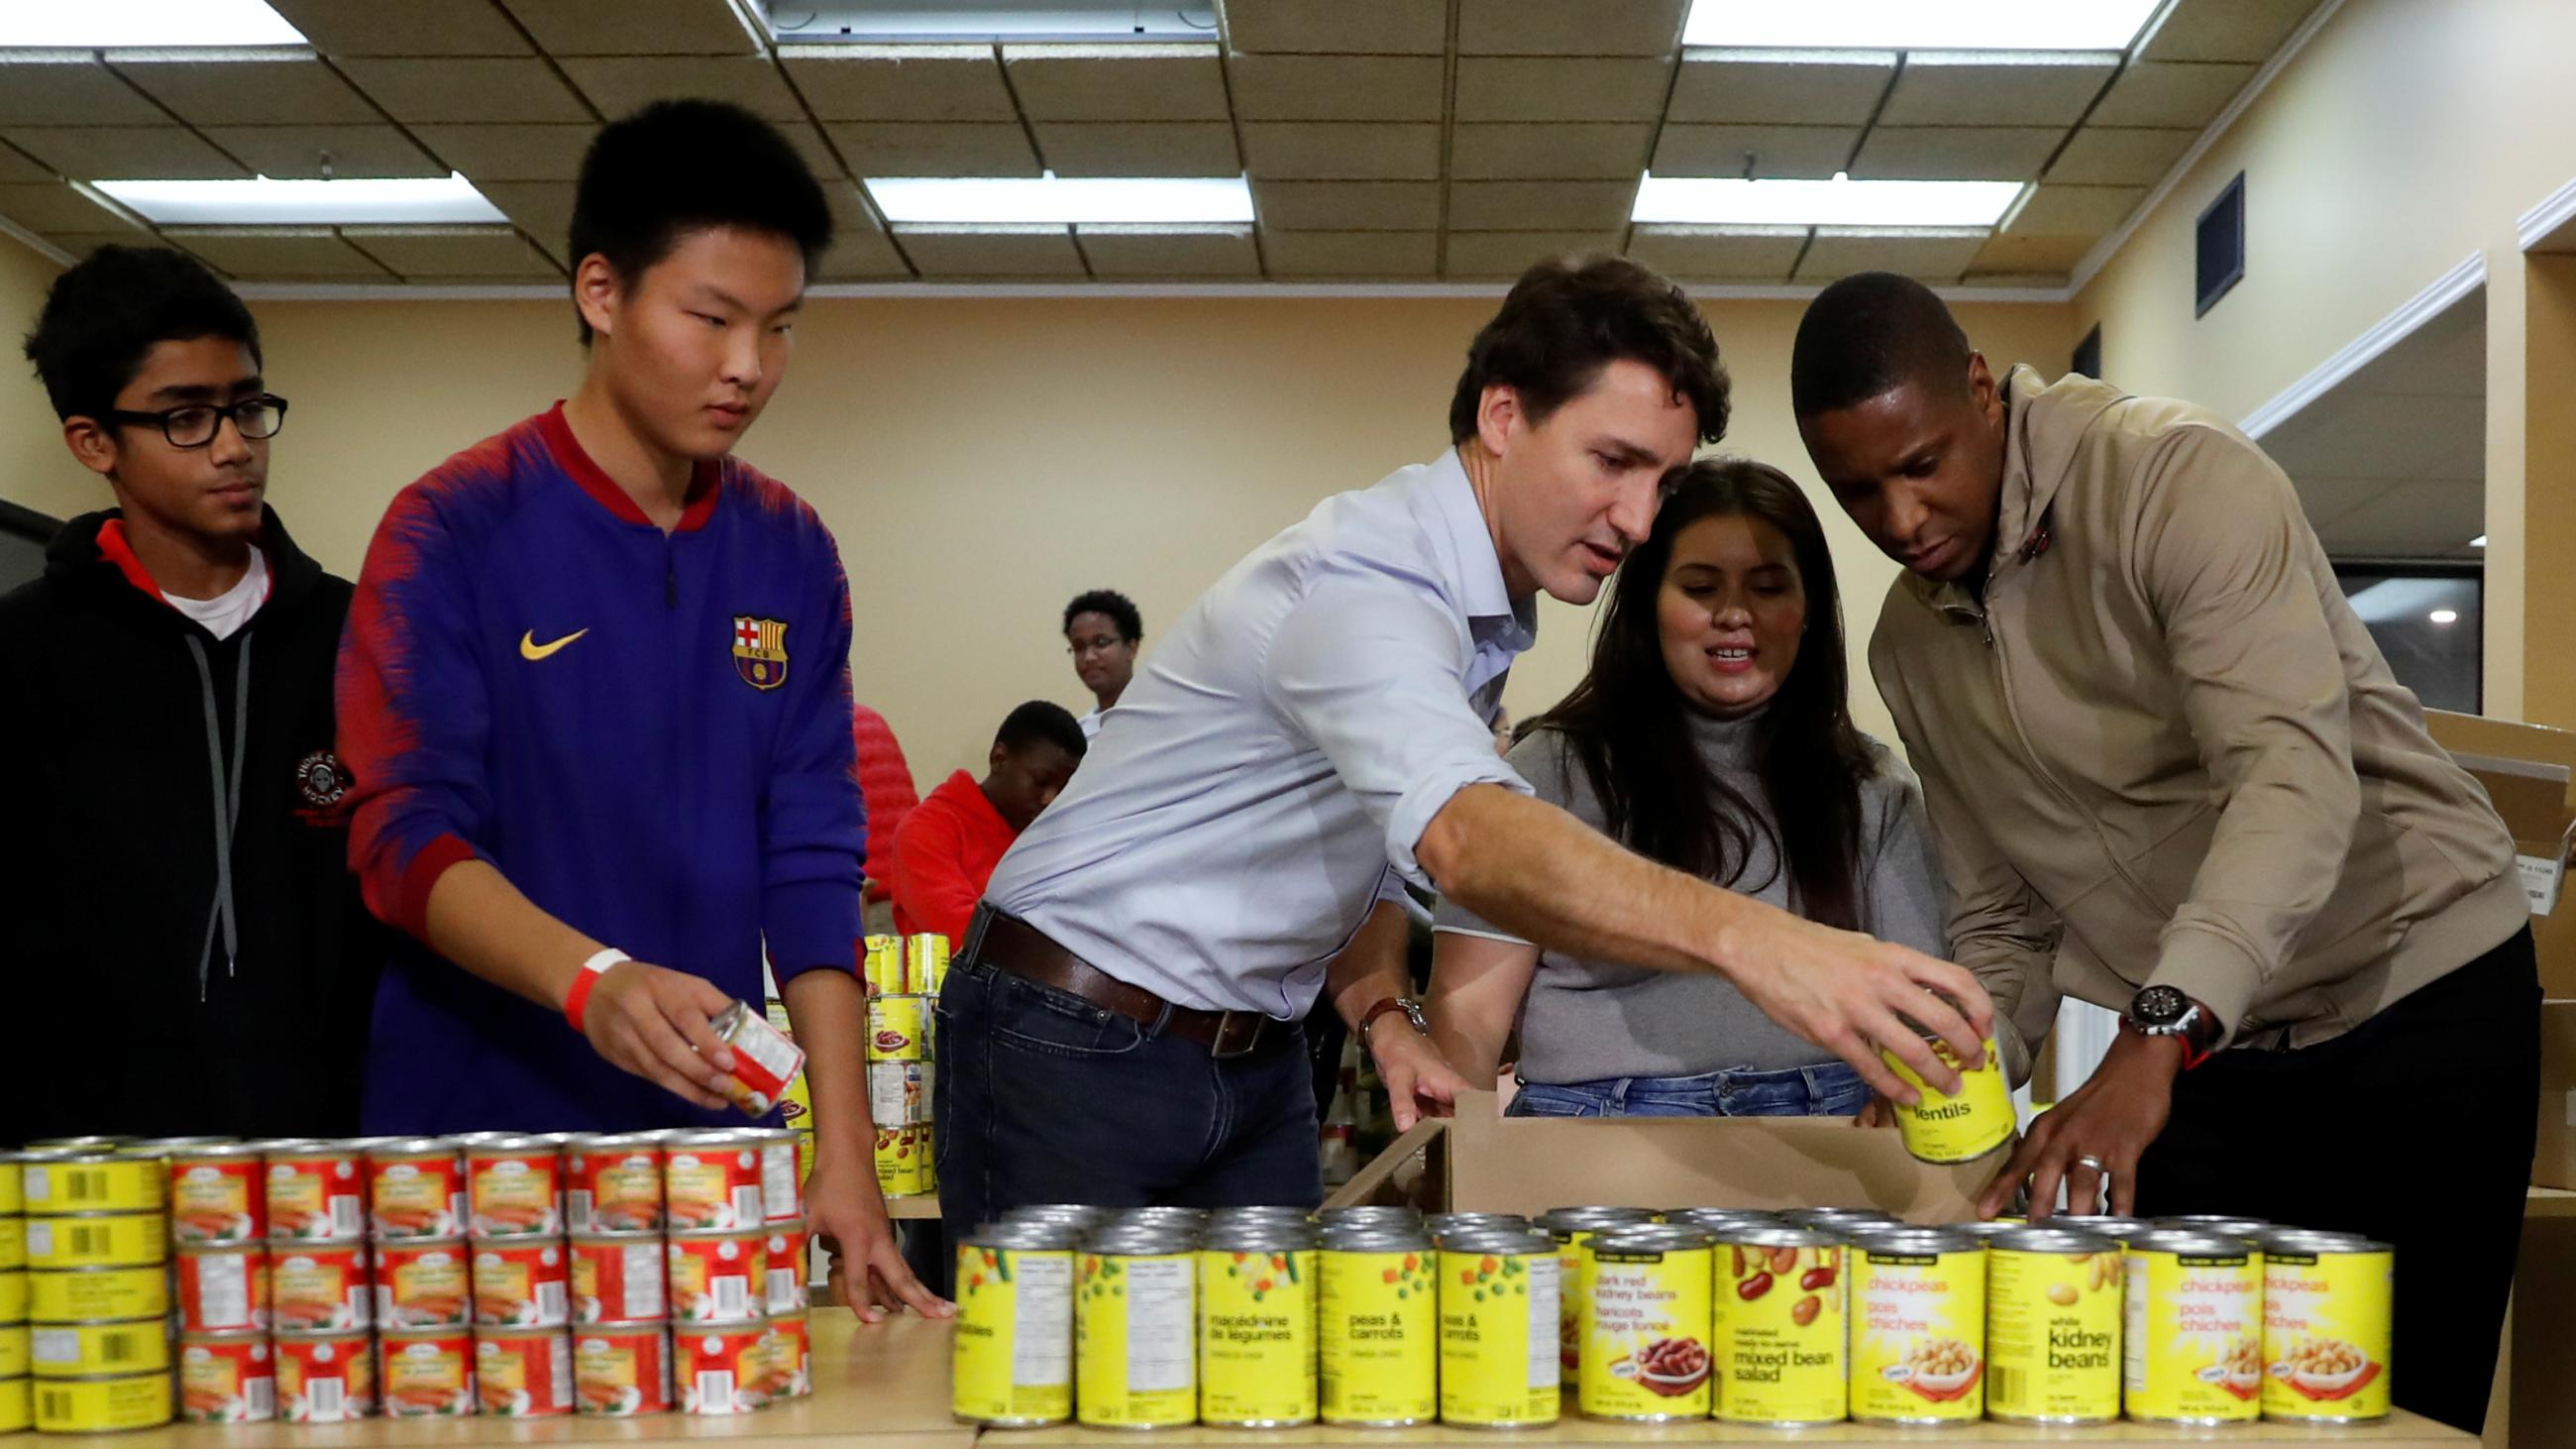 Canadian Prime Minister Justin Trudeau and Toronto Raptors President Masai Ujiri take part in a Thanksgiving food drive in Toronto, Ontario, Canada, on October 13, 2019.